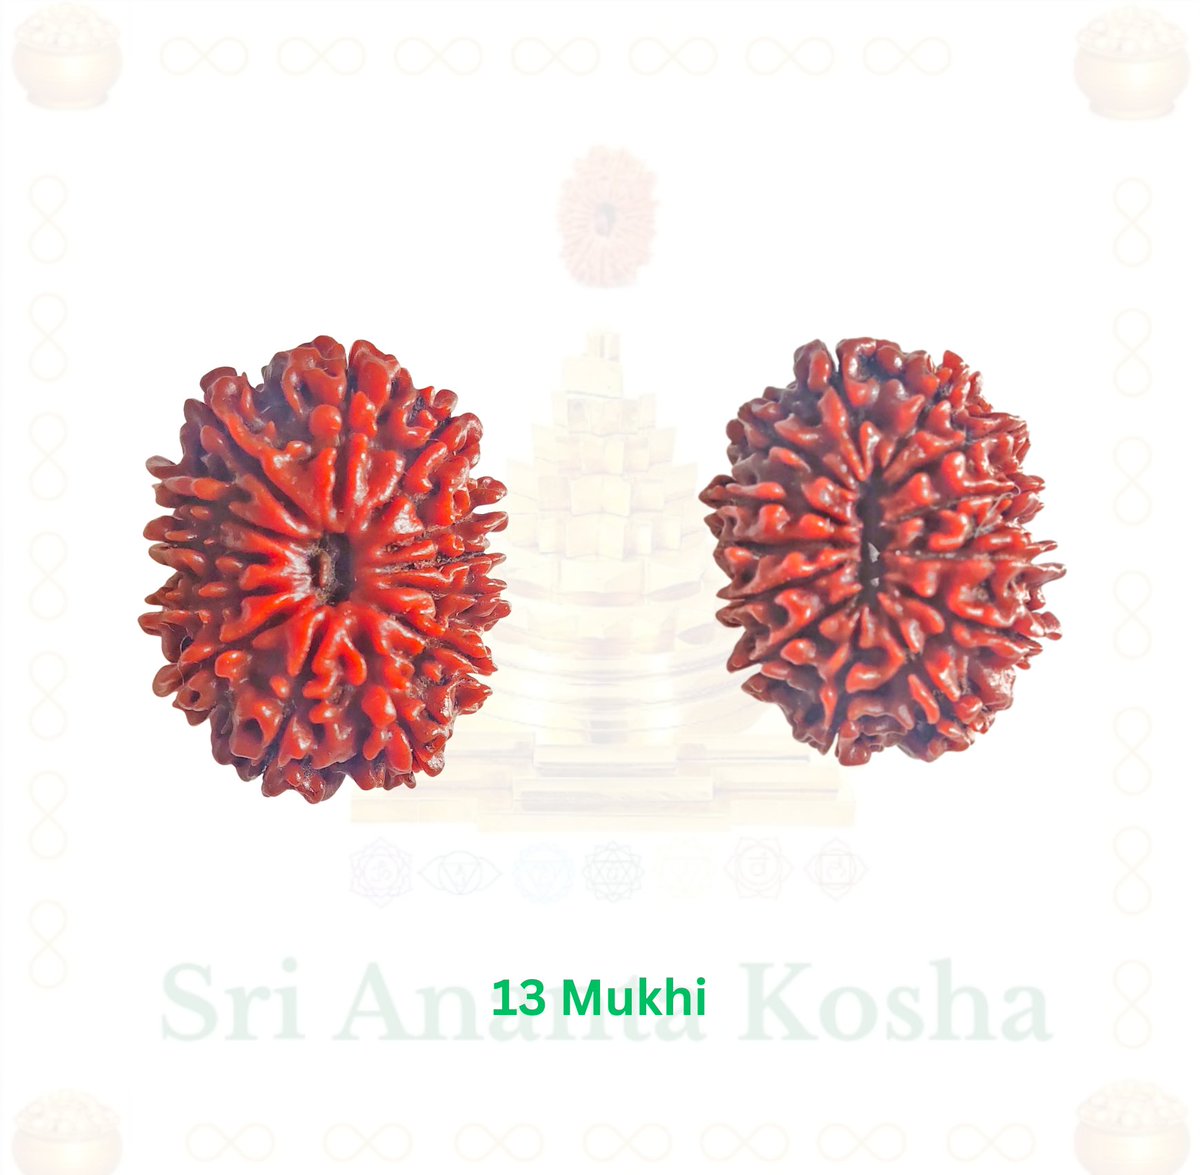 Jai ShivShakti 🙏

13 Mukhi Rudraksha :-

Powerful Rudraksha to improve relationships.

It blesses the wearer with a magnetic personality and charisma.

Enhances aura to get success in worldly responsibilities.

It removes illusions from the wearer to uplift consciousness to…